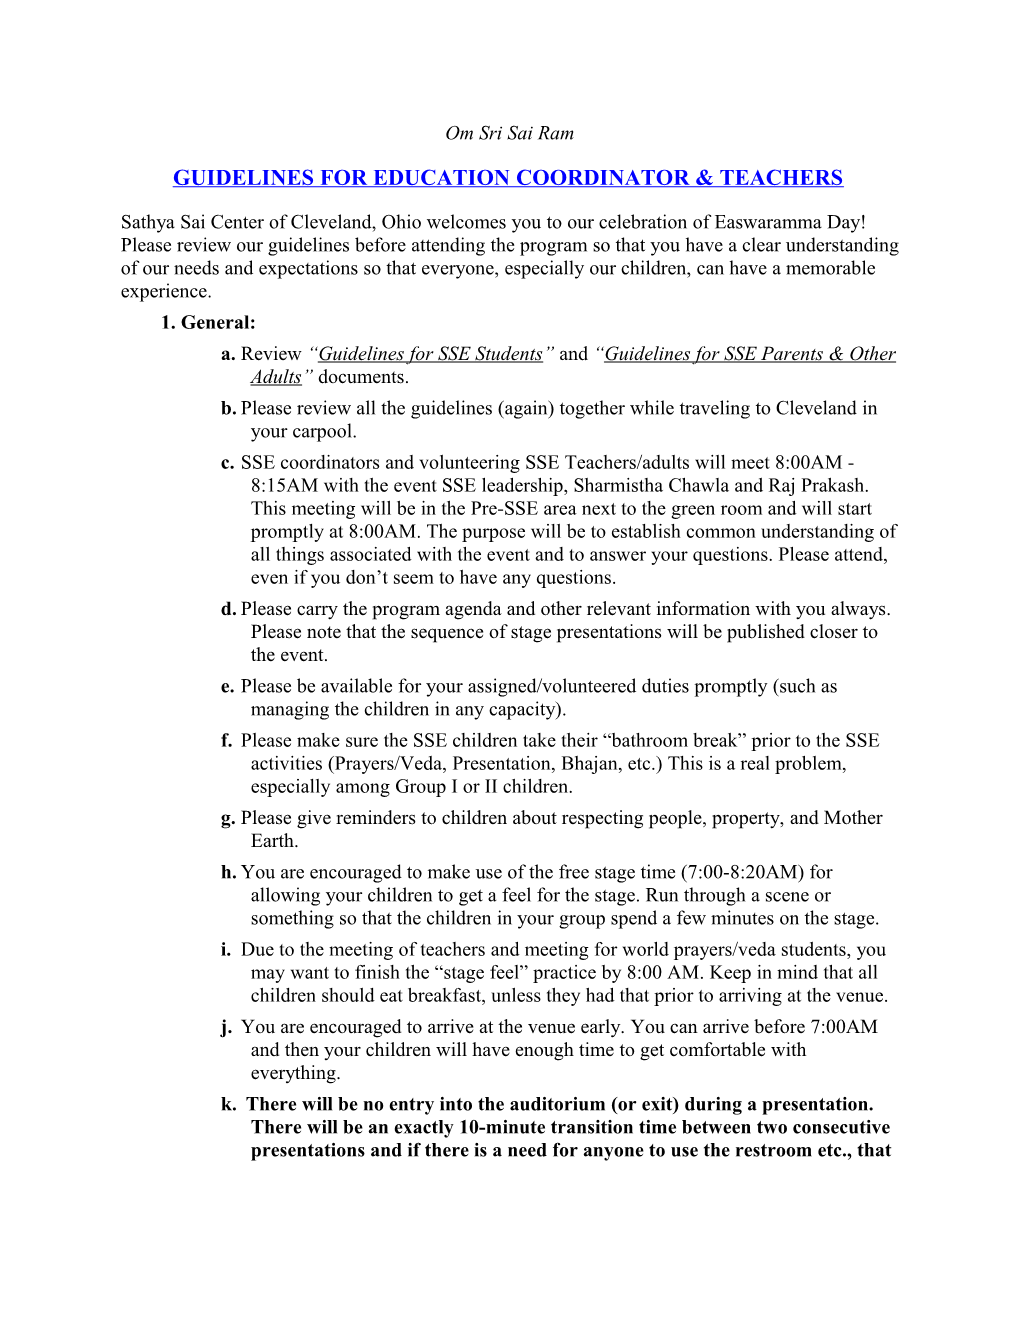 Guidelines for Education Coordinator & Teachers